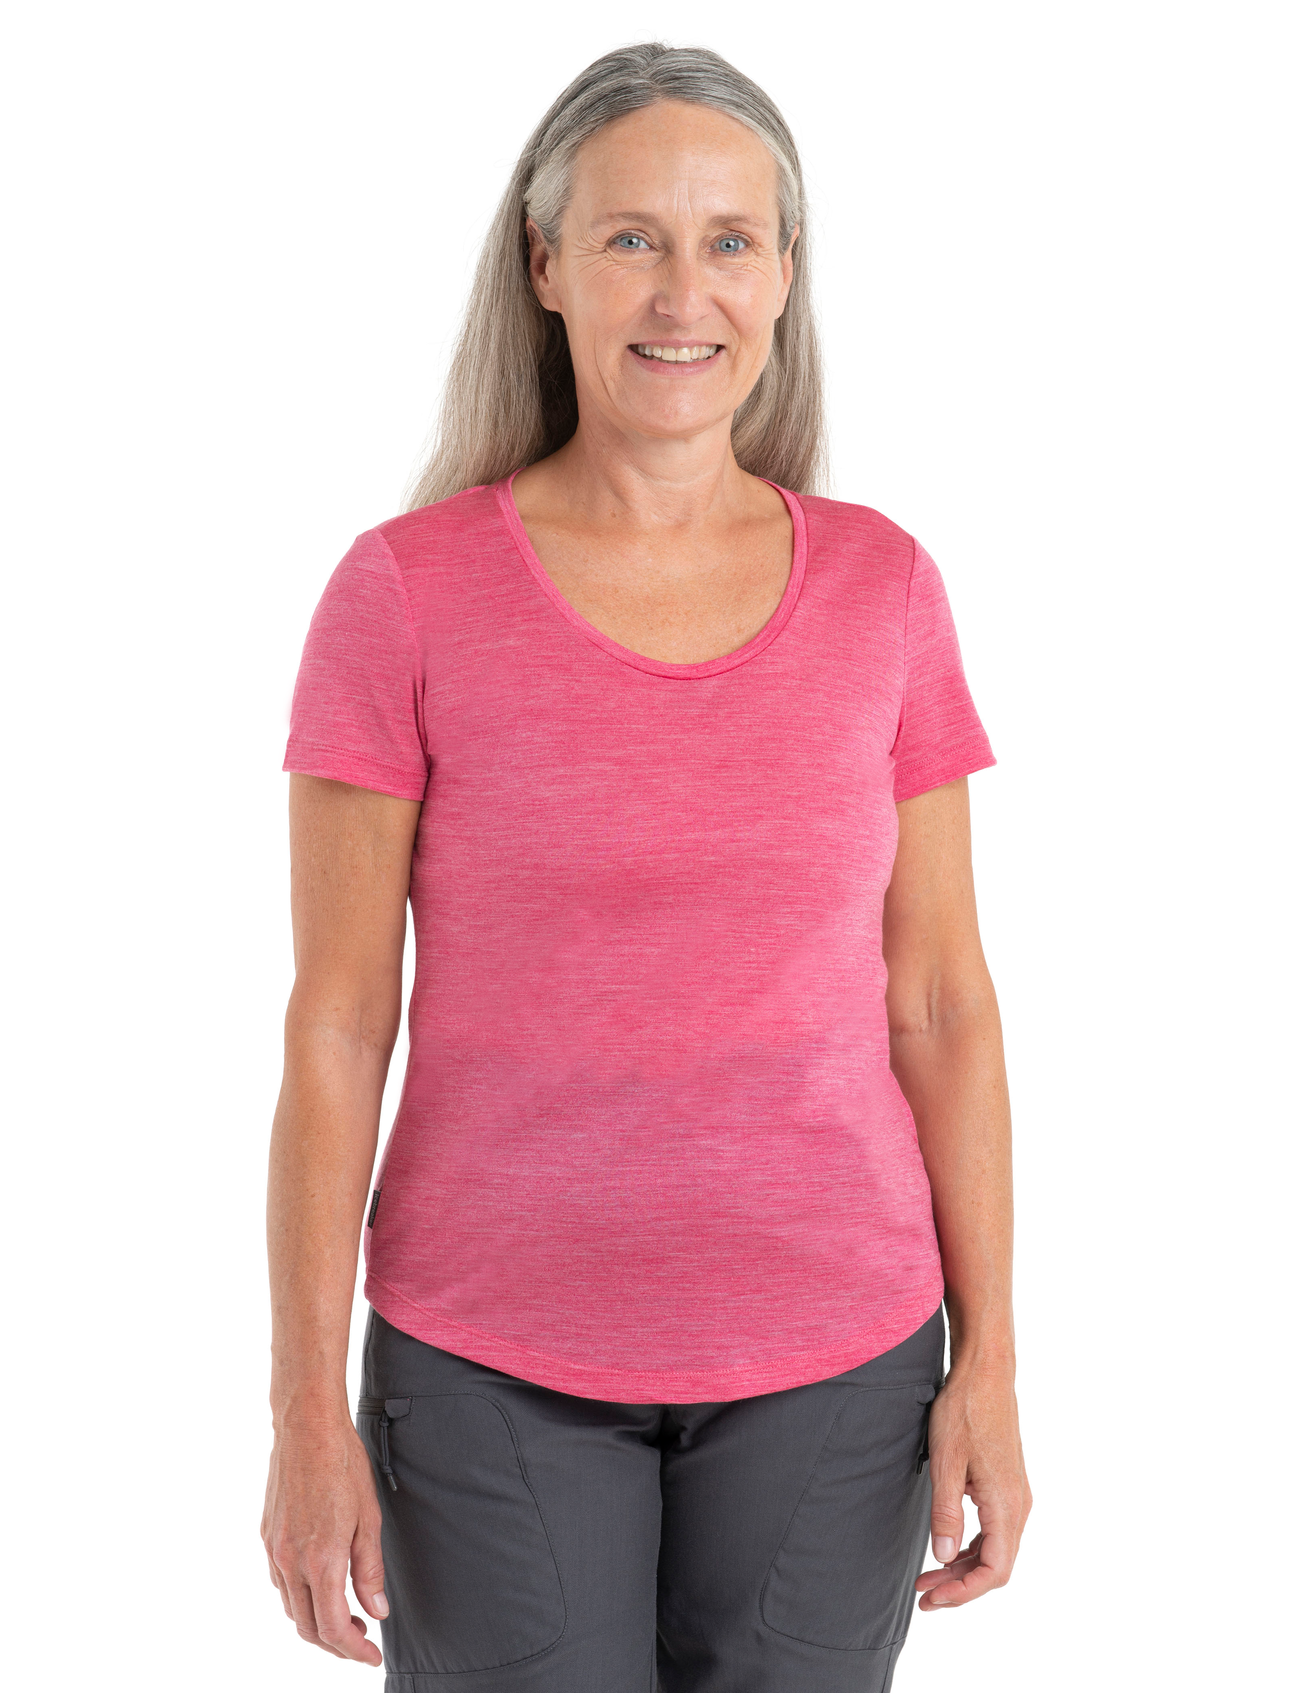 Womens Merino Sphere II Short Sleeve Scoop T-Shirt A soft merino-blend tee made with our lightweight Cool-Lite™ jersey fabric, the Sphere II Short Sleeve Scoop Tee provides natural breathability, odor resistance and comfort.